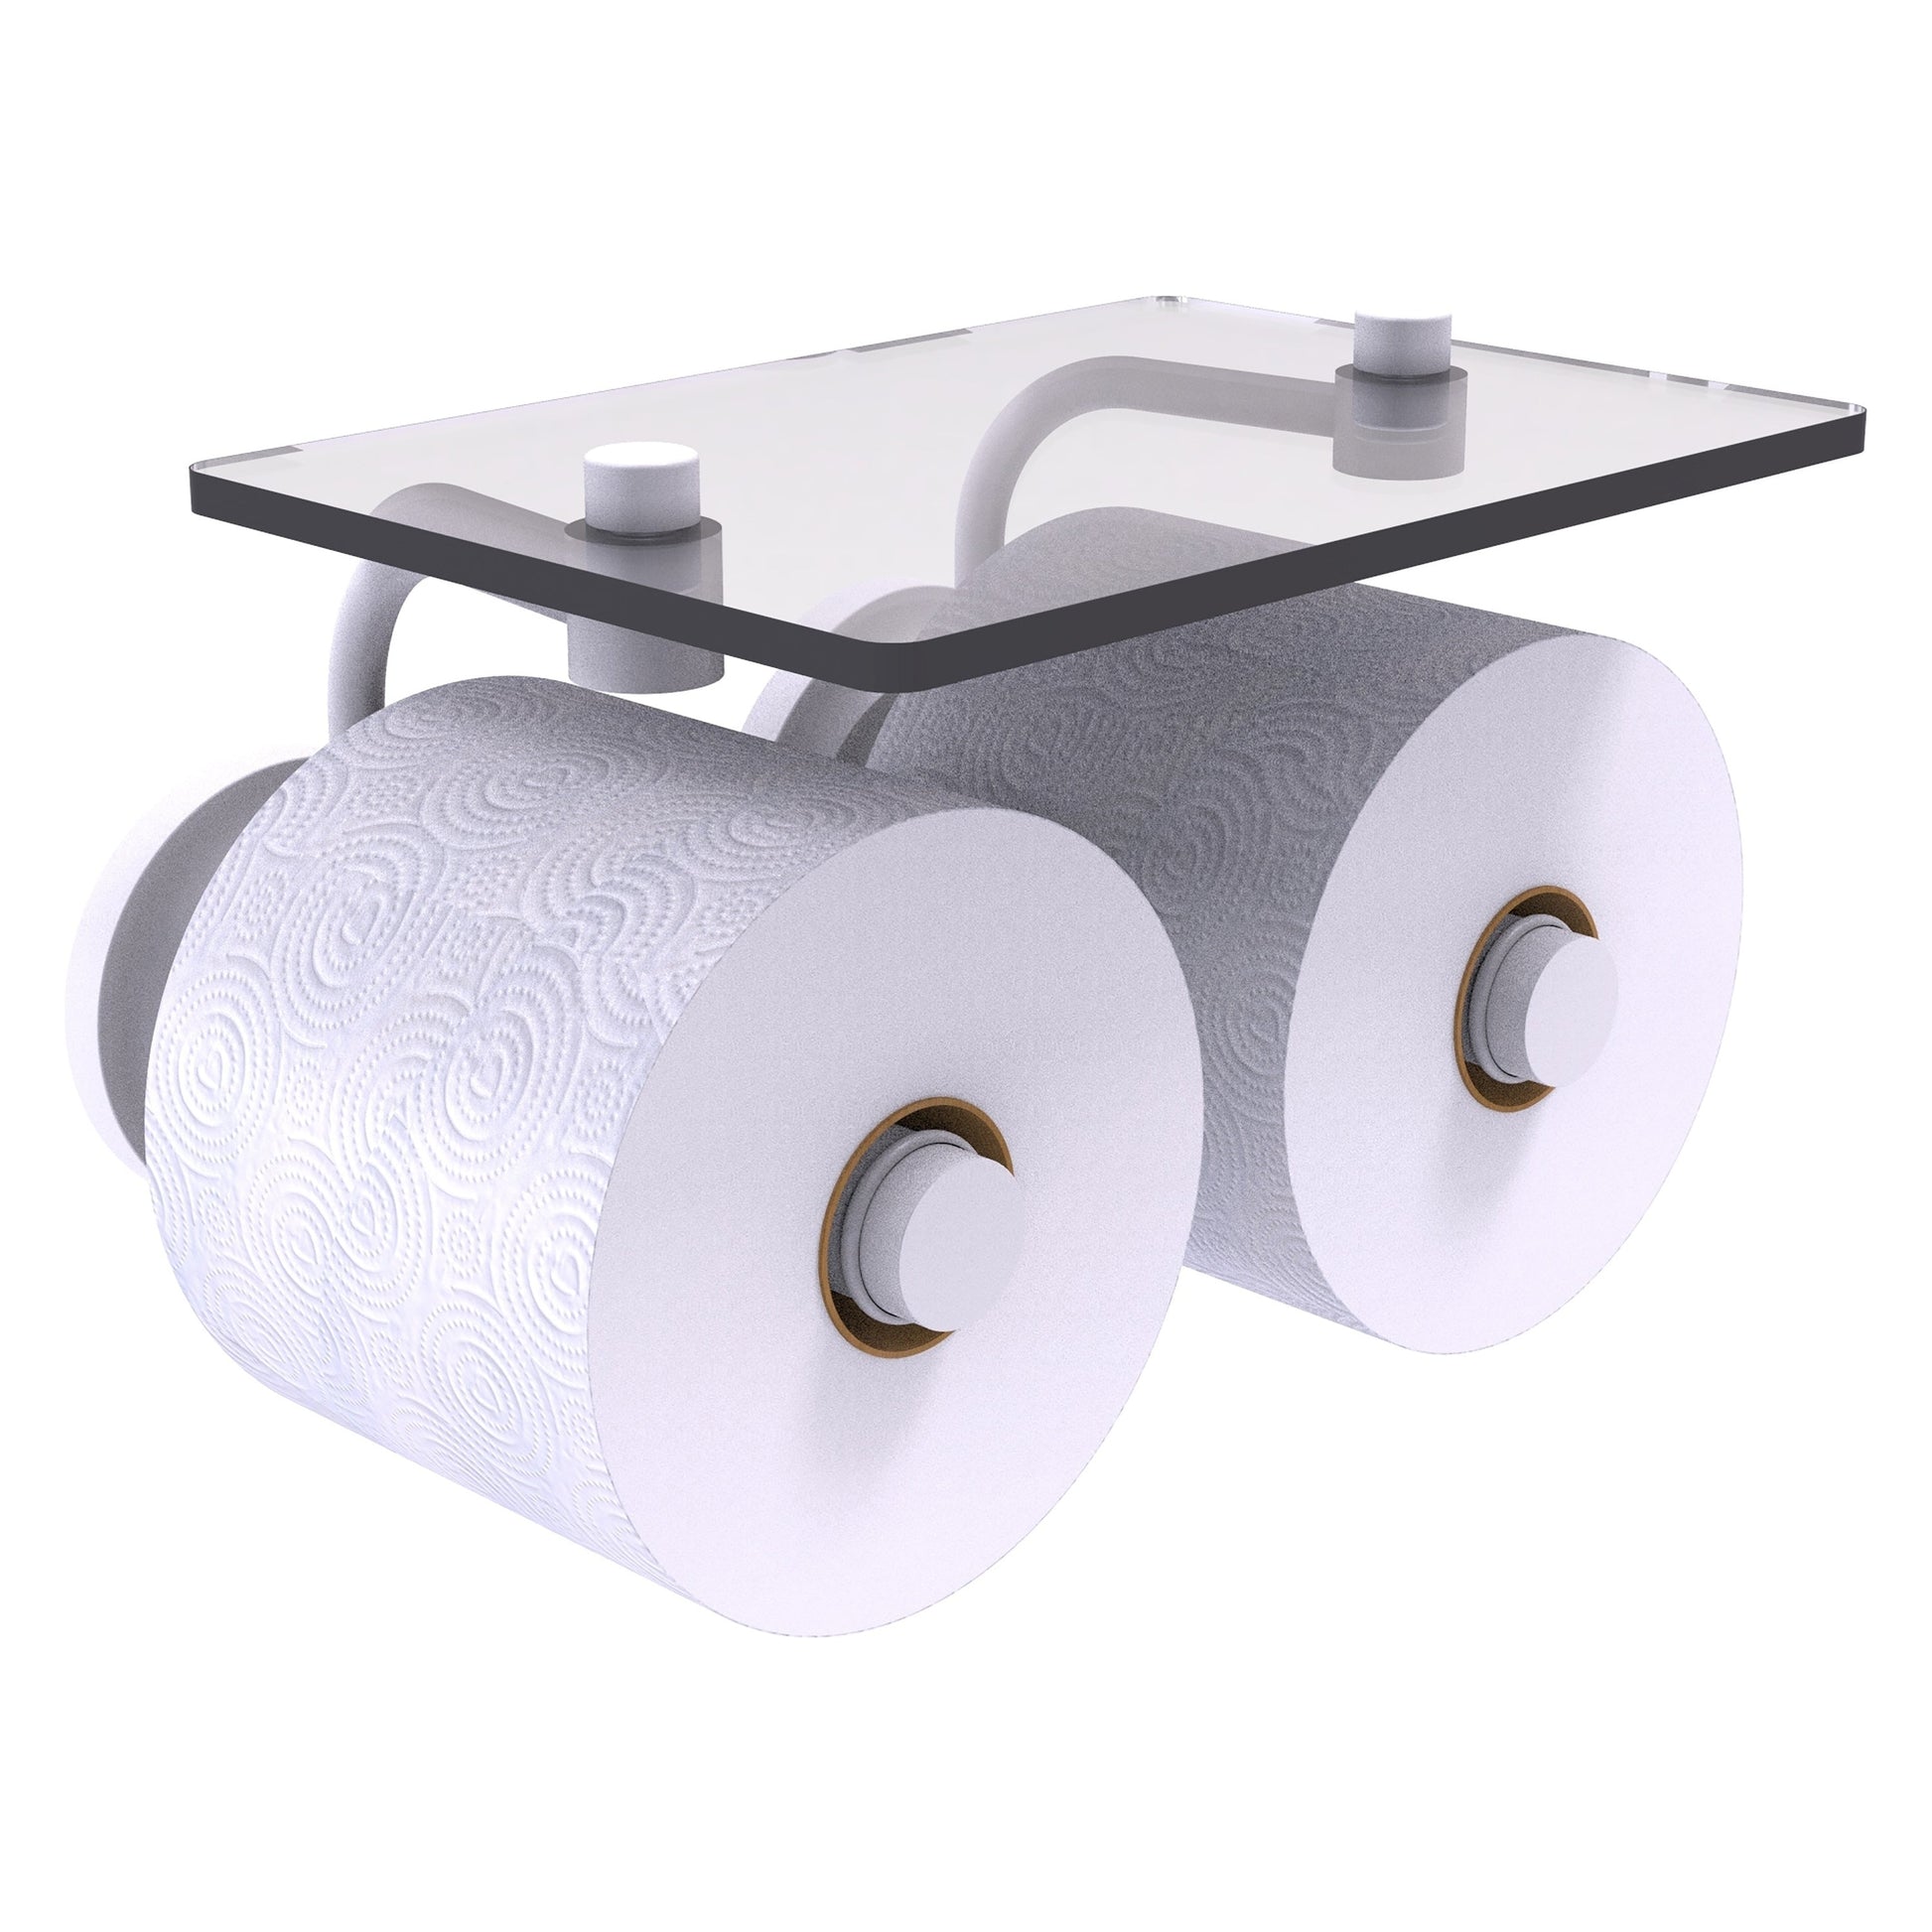 Allied Brass Que New 8.5" x 7.4" Matte White Solid Brass 2-Roll Toilet Paper Holder With Glass Shelf